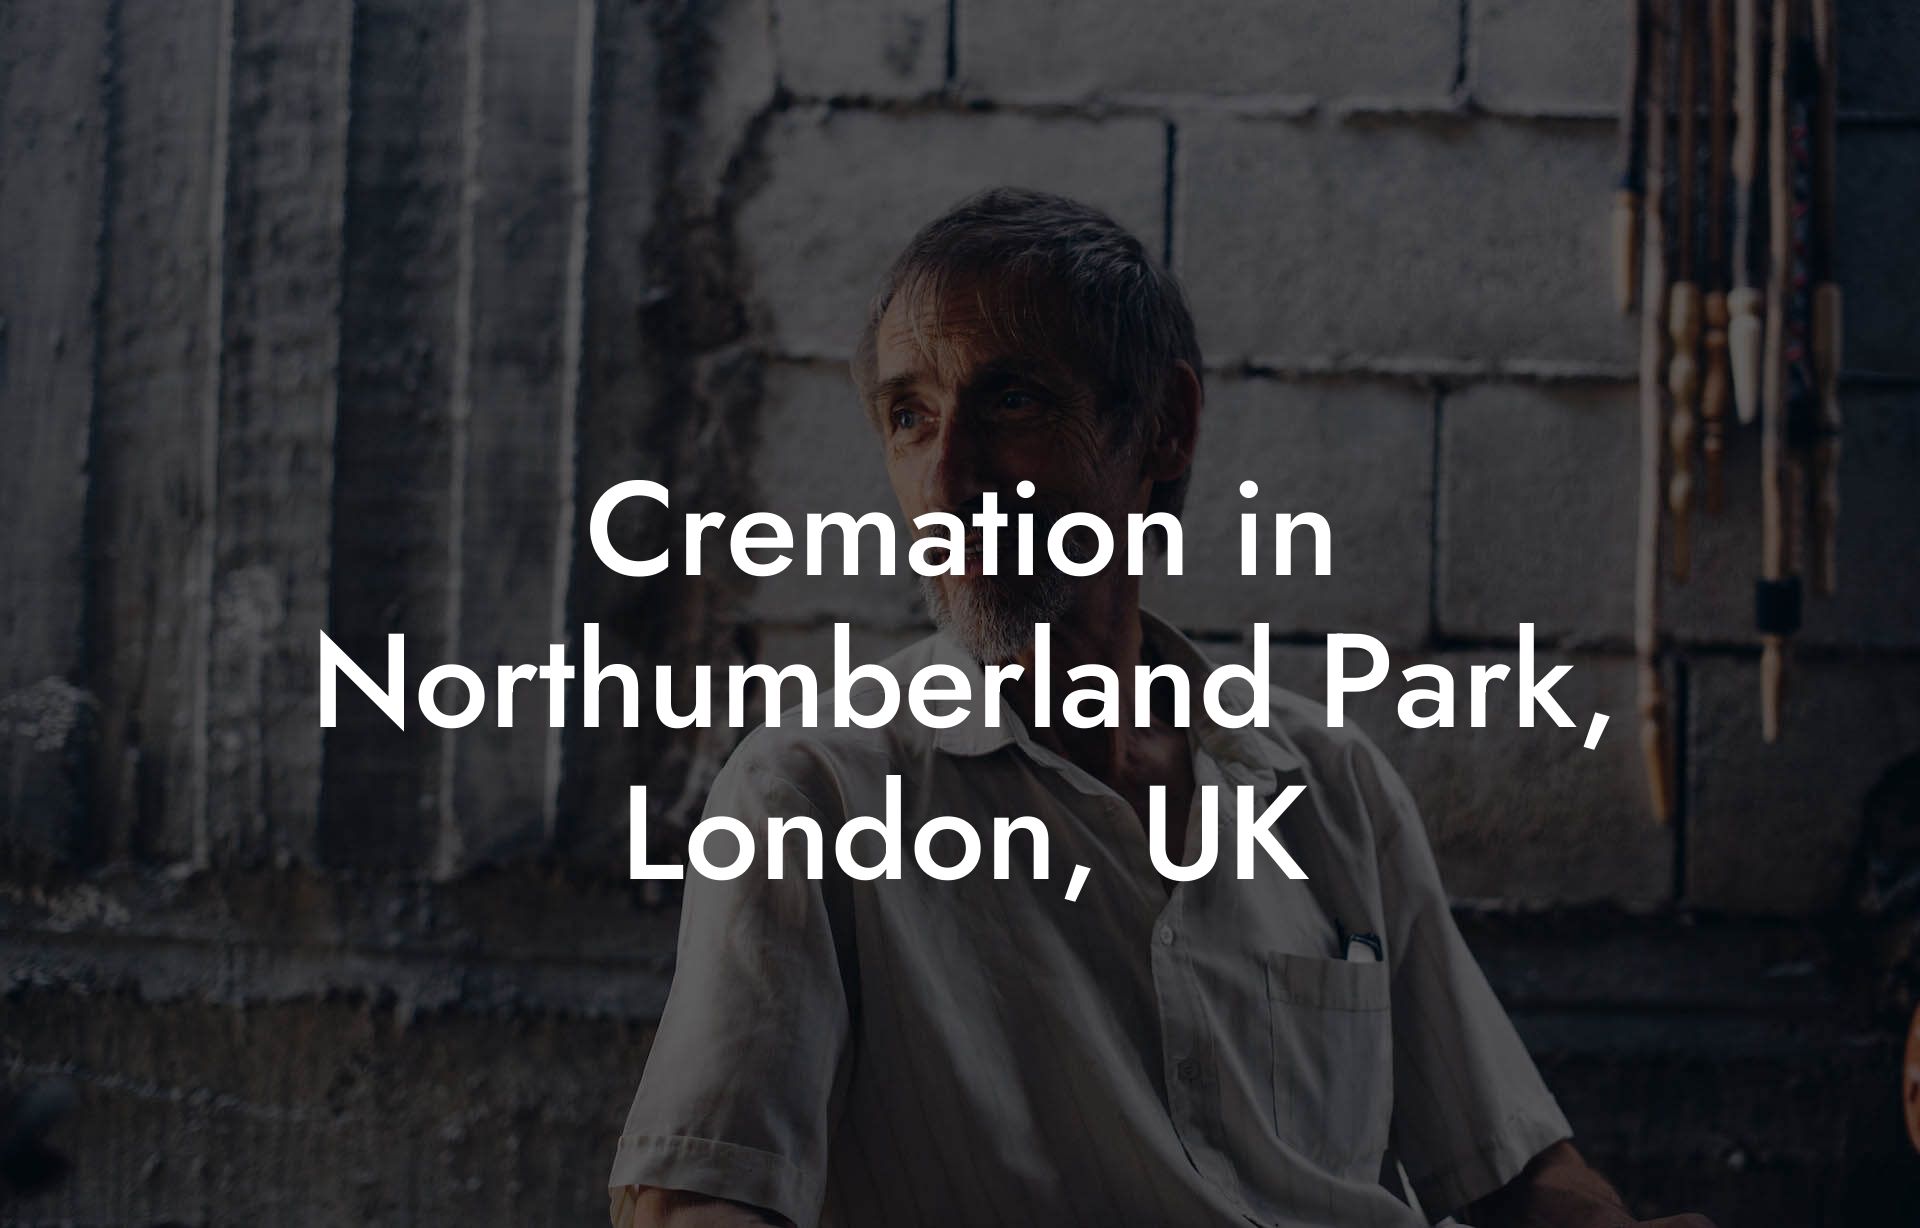 Cremation in Northumberland Park, London, UK